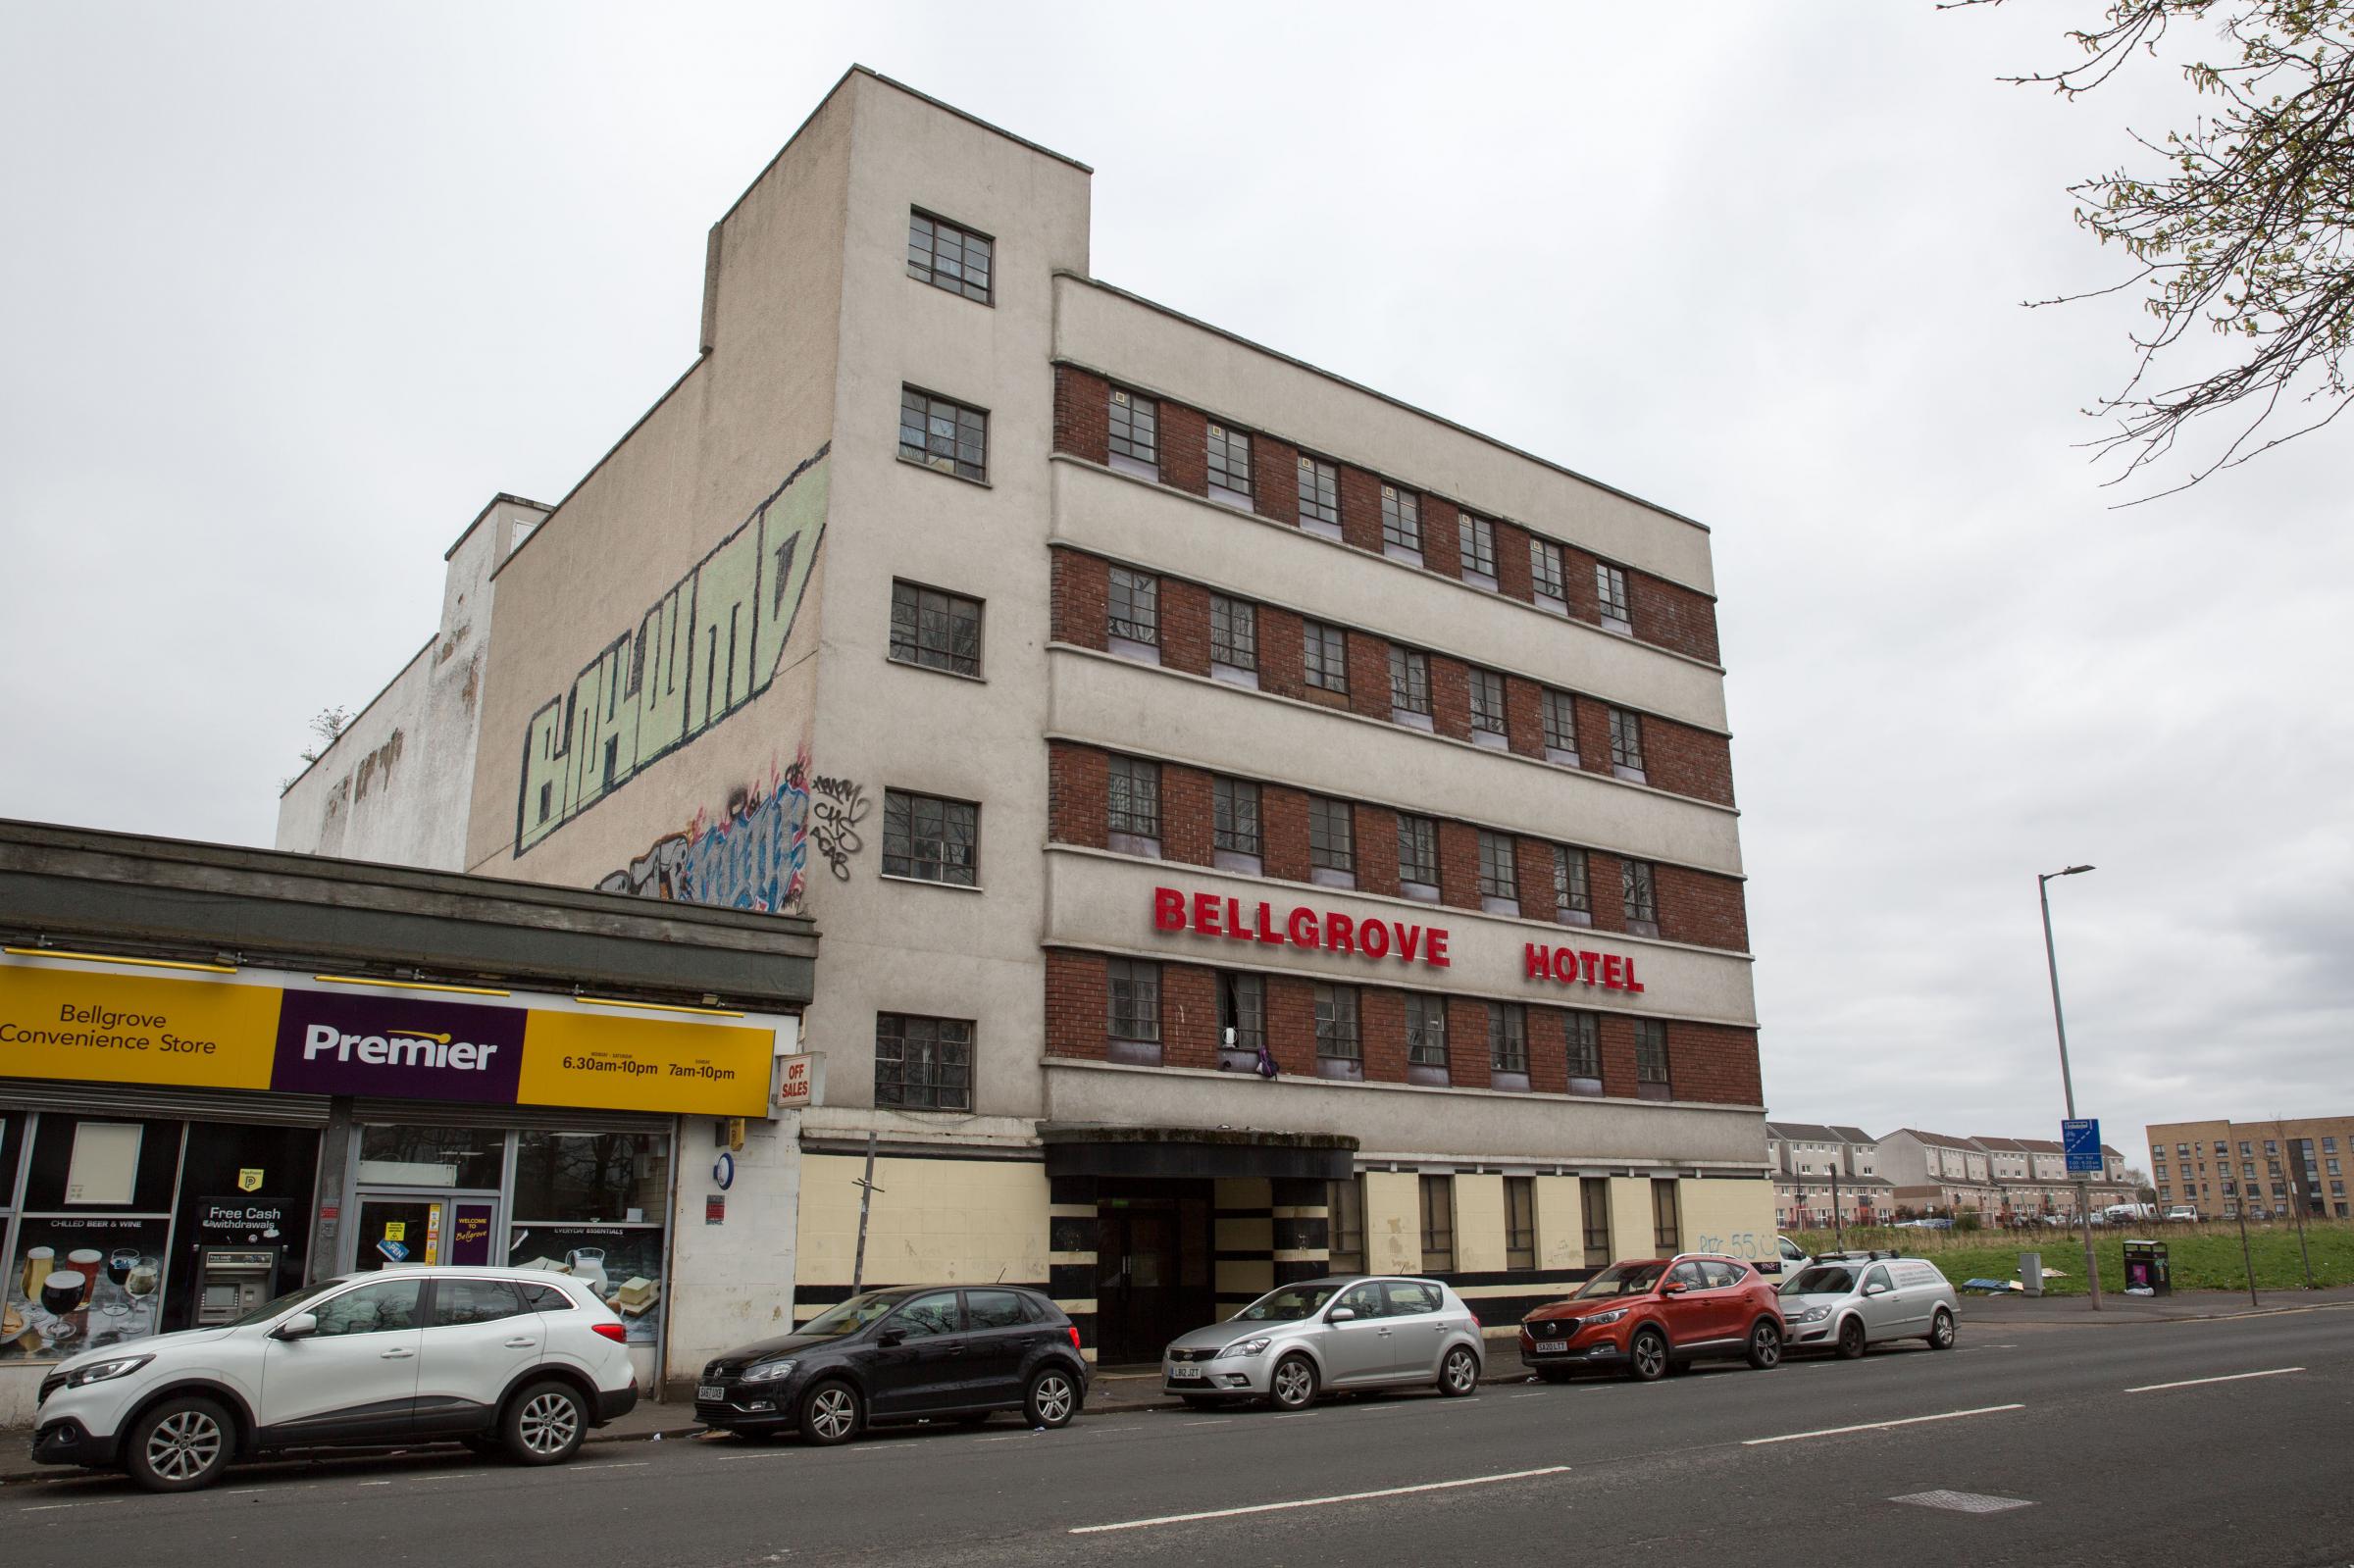 Glasgow Bellgrove Hotel residents to be moved